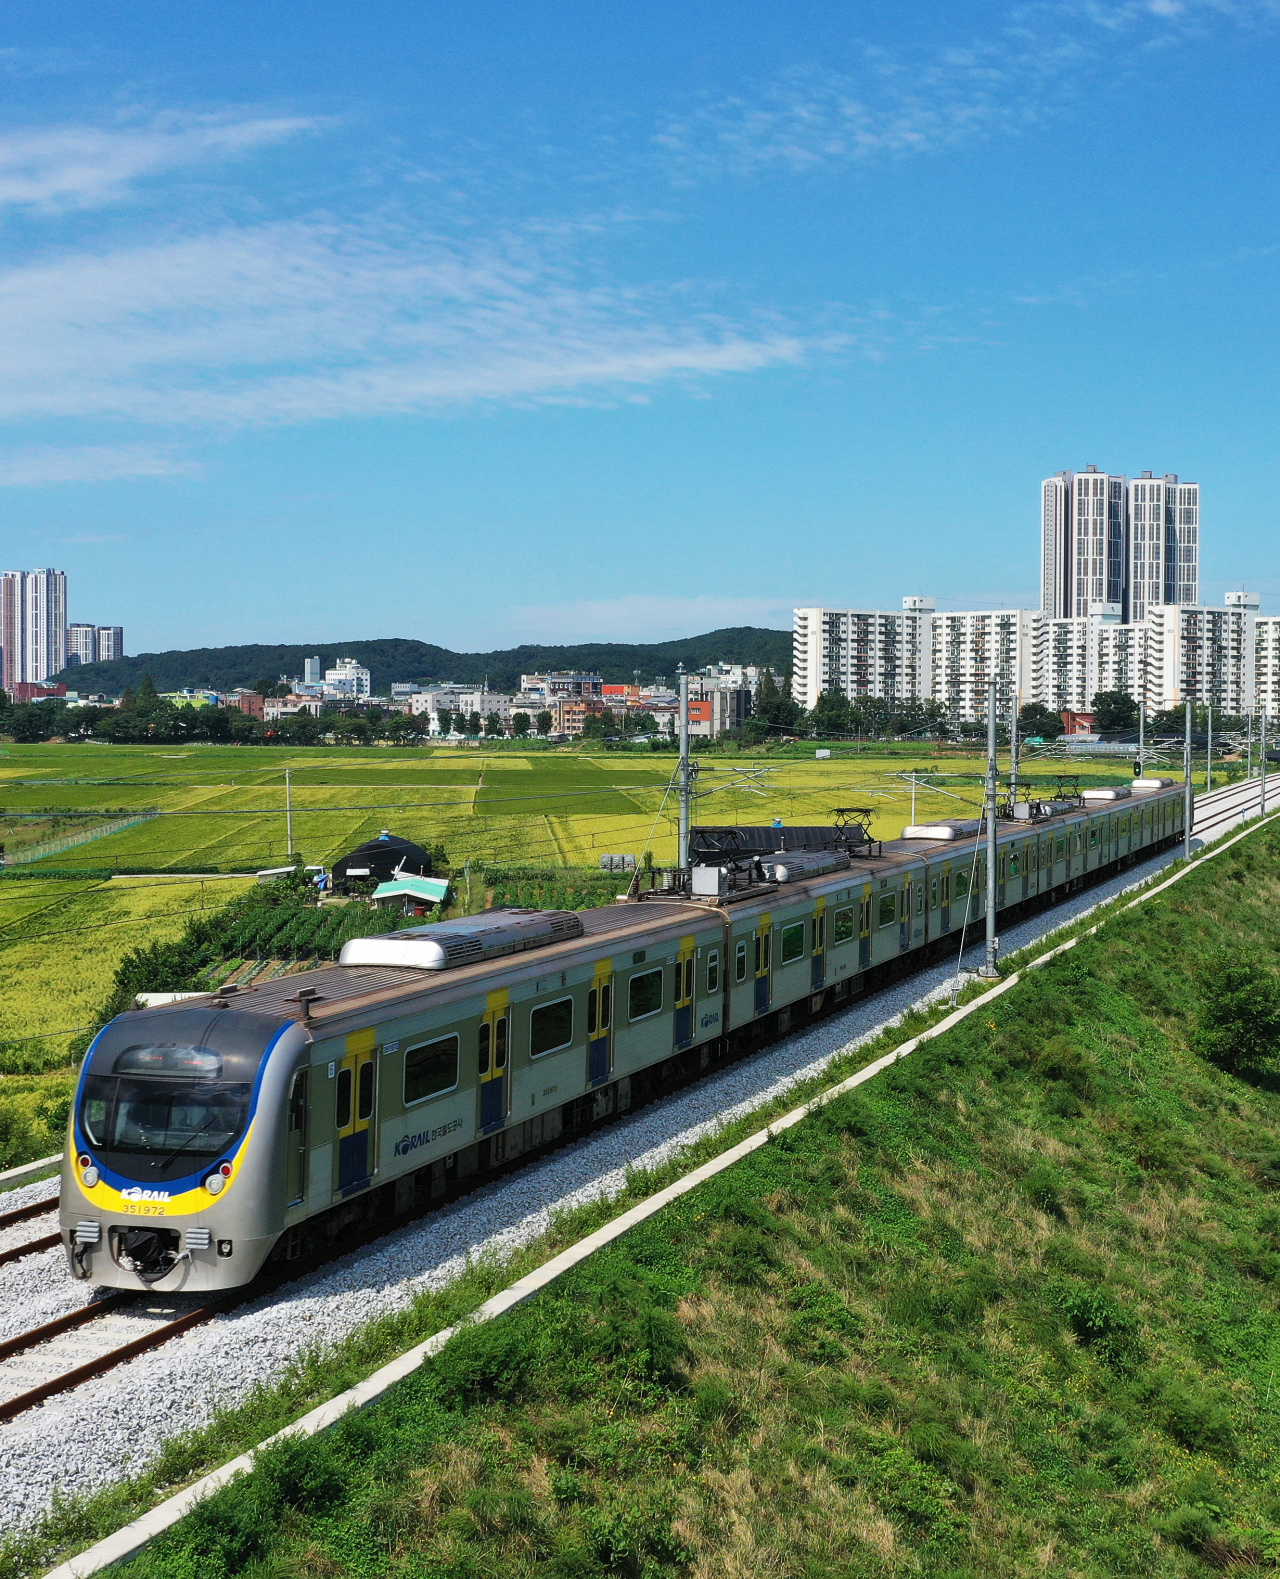 A train is on a test run Tuesday ahead of the full opening of the new Suin Line on Saturday that will link Suwon, Gyeonggi Province, and Incheon in 70 minutes. (Yonhap)